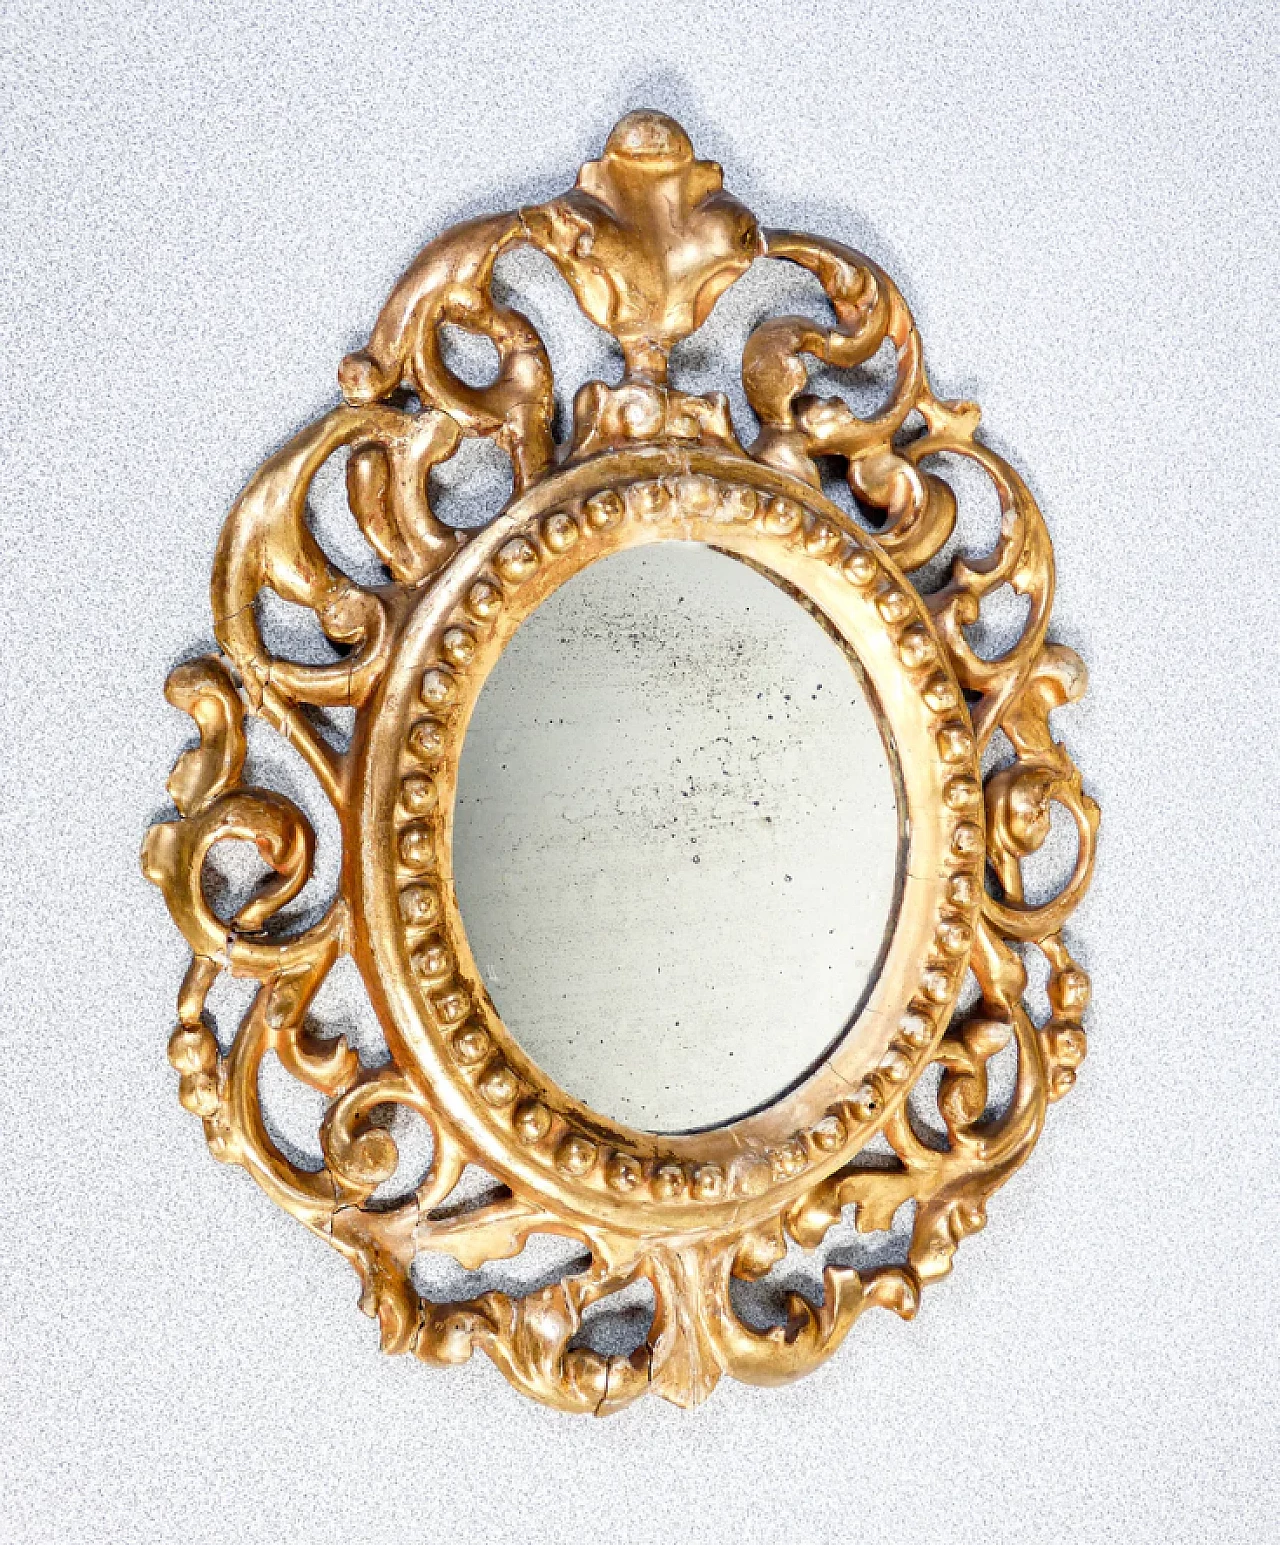 Carved wooden mirror gilded with gold leaf, 18th century 1